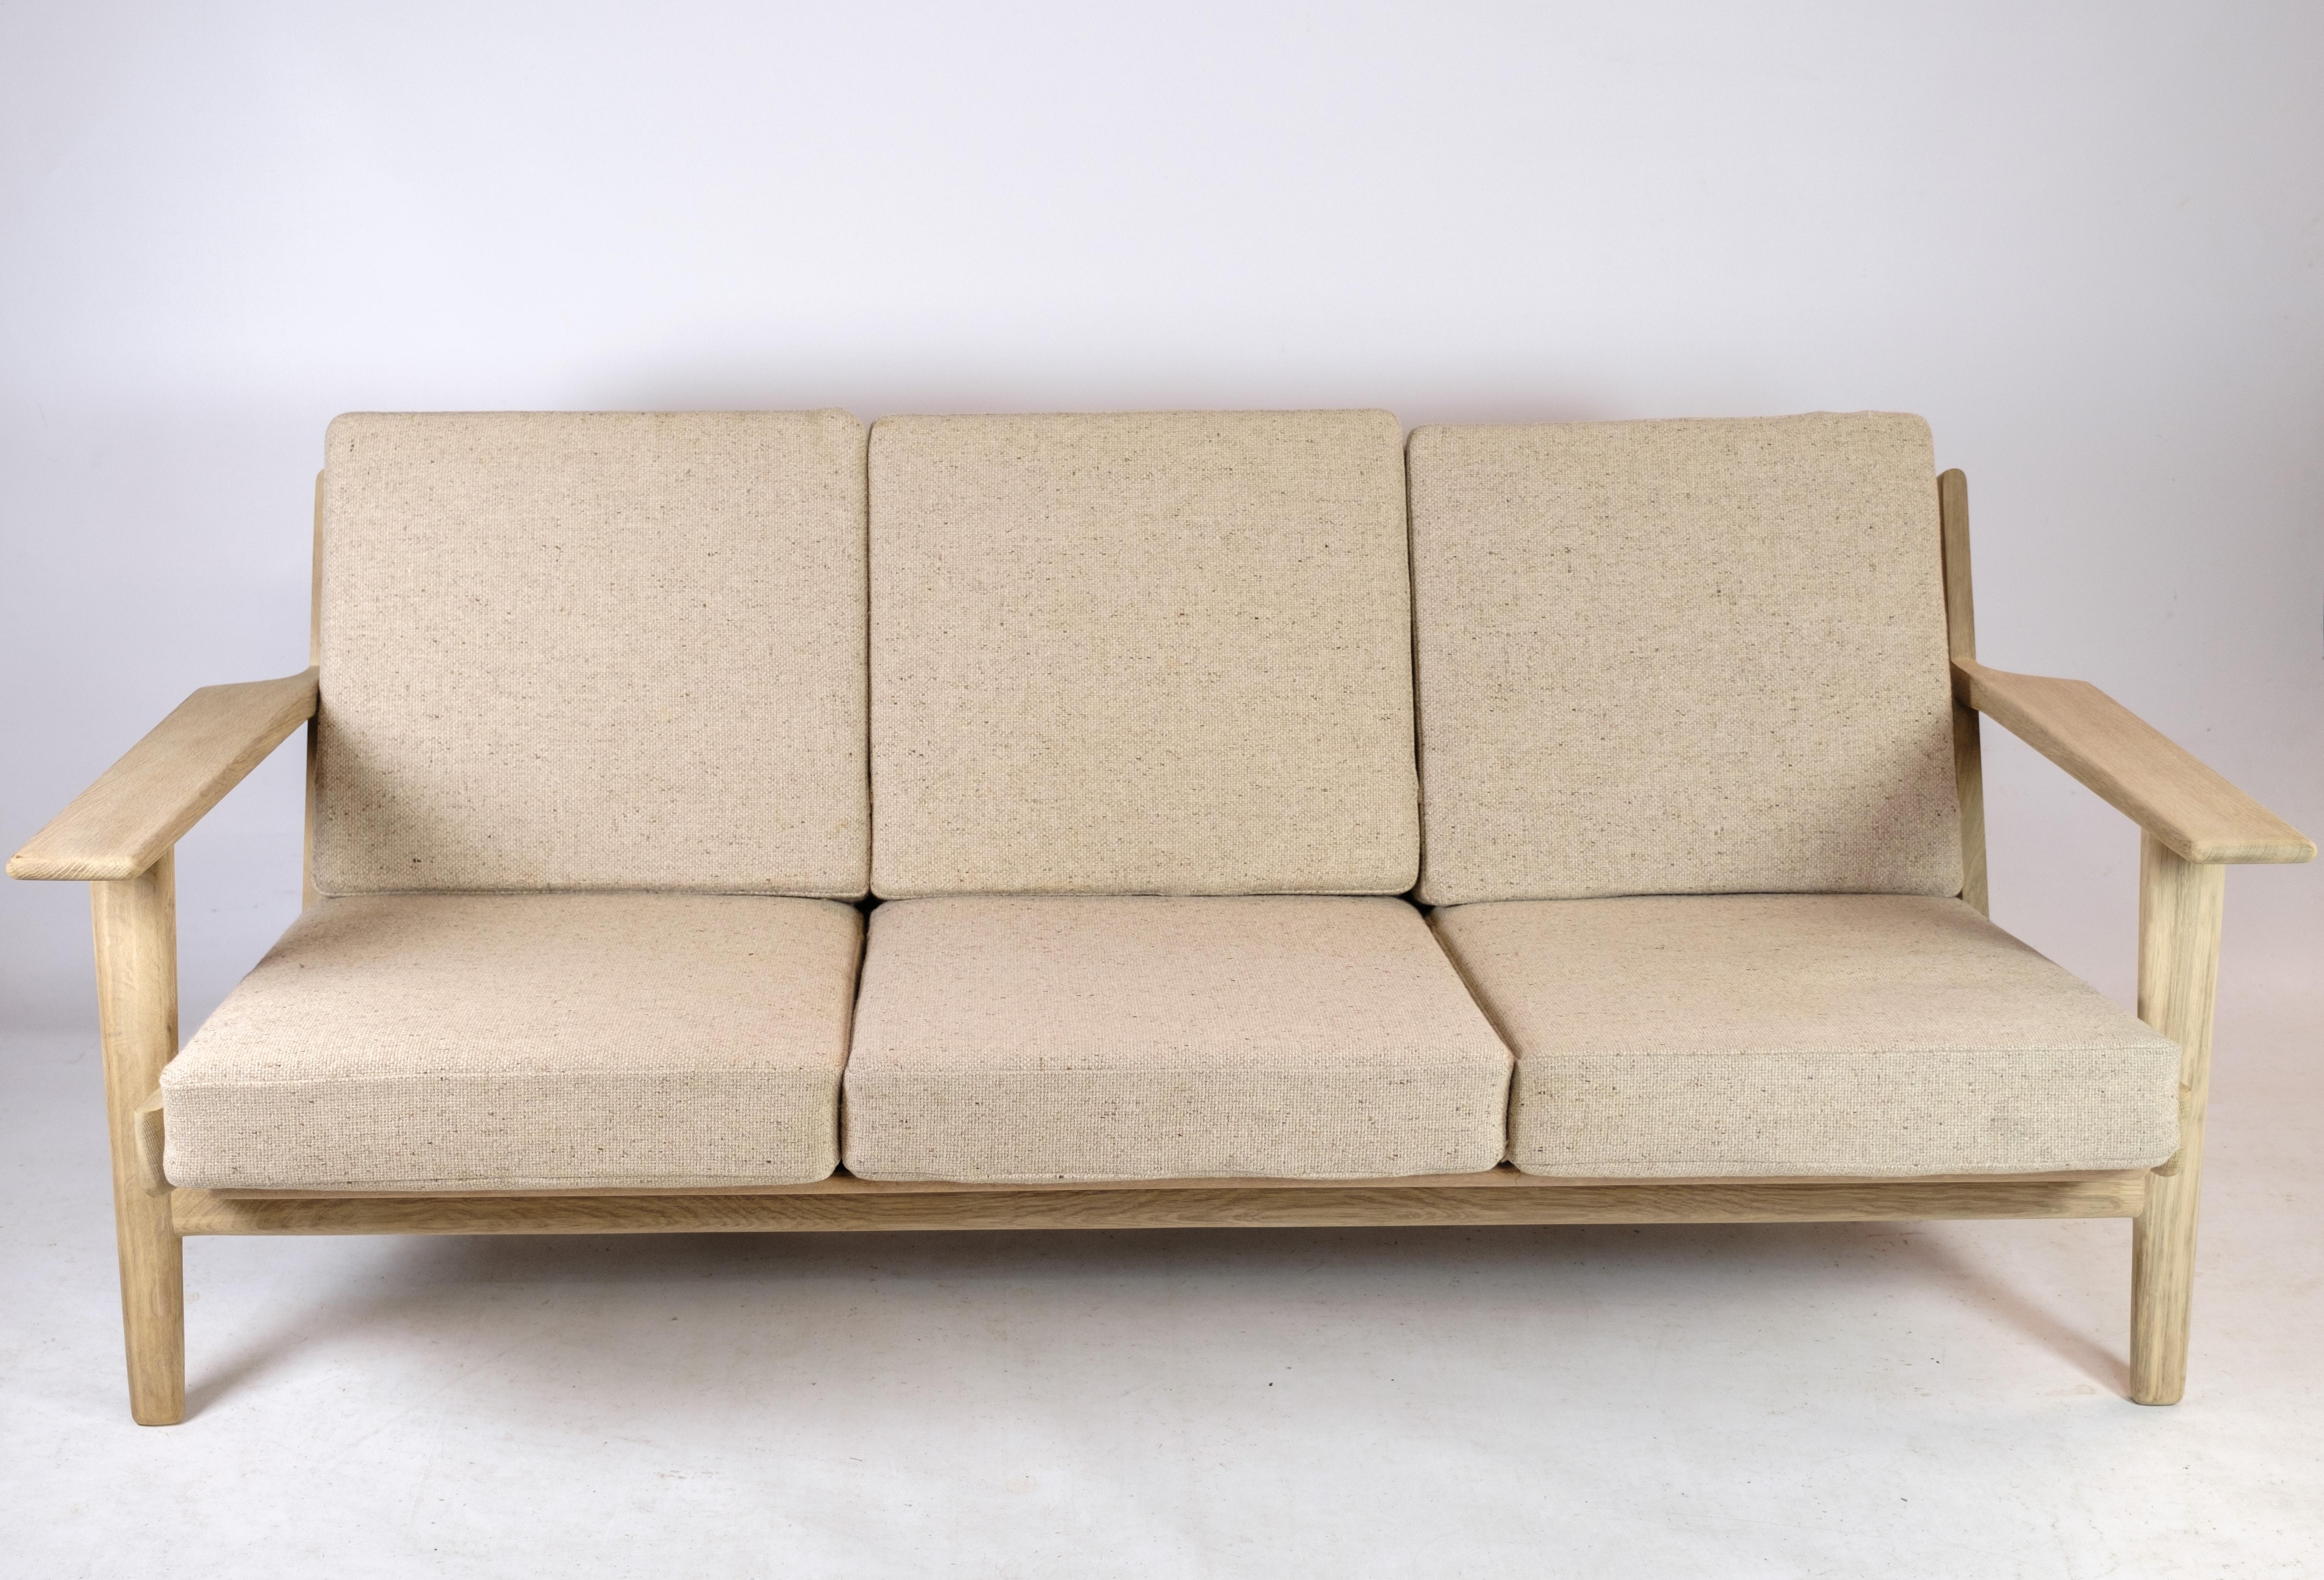 Model GE 290 is a 3-seater sofa designed by the famous Danish designer Hans J. Wegner in 1953. The sofa has a stylish oak frame and light fabric cushions, which gives it an elegant and timeless look. It is made from high-quality materials, which